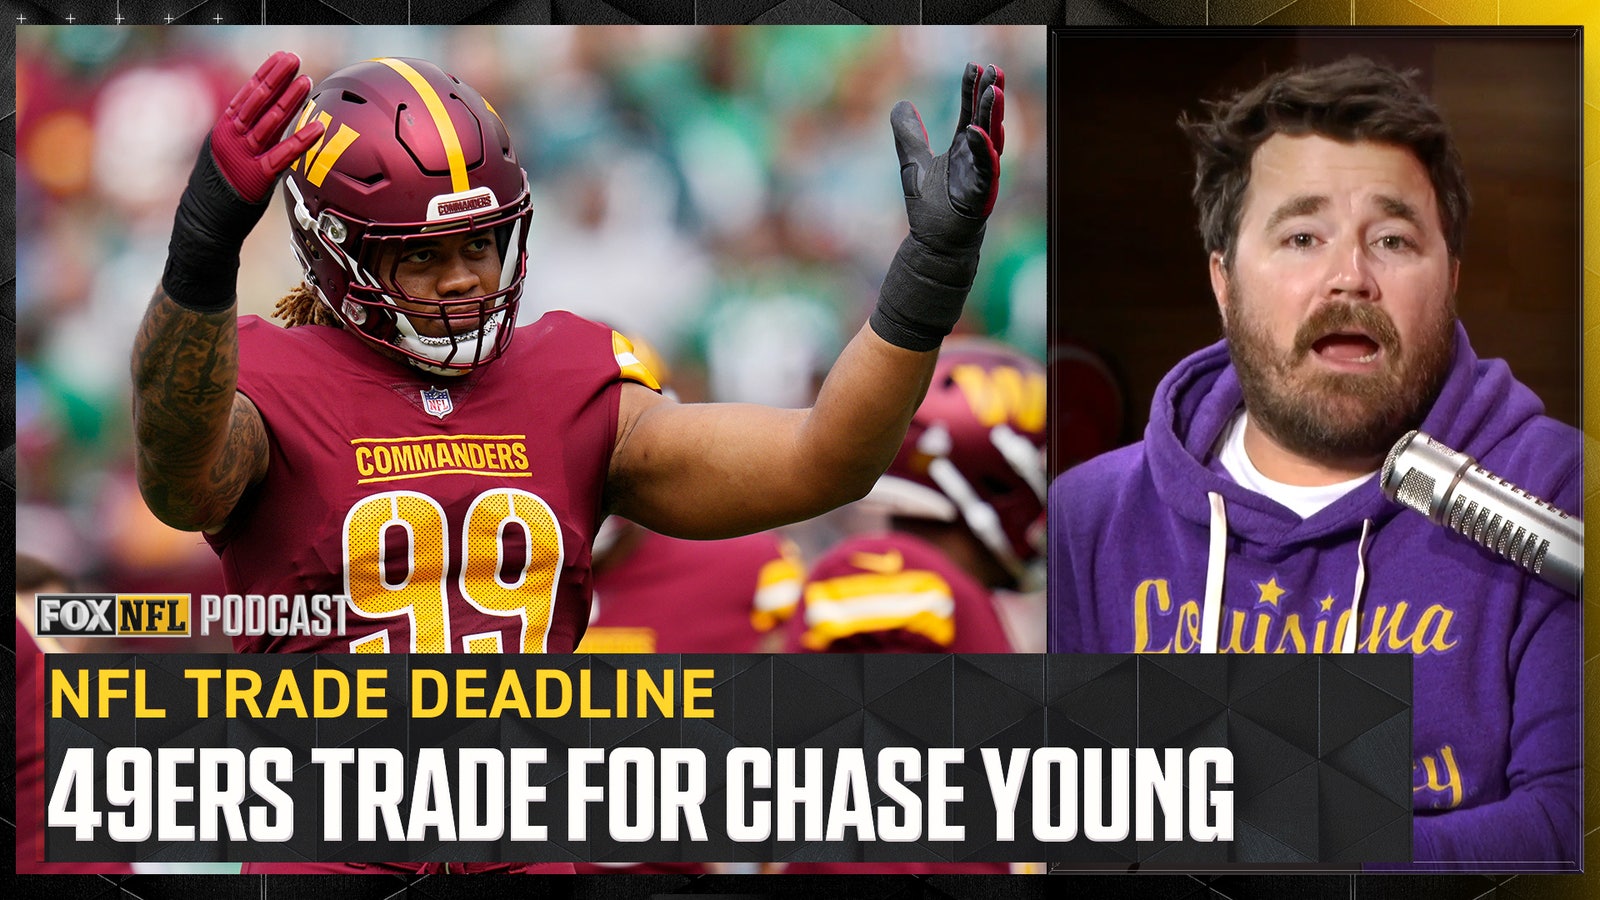 Did the 49ers win the trade deadline with acquisition of Chase Young? 